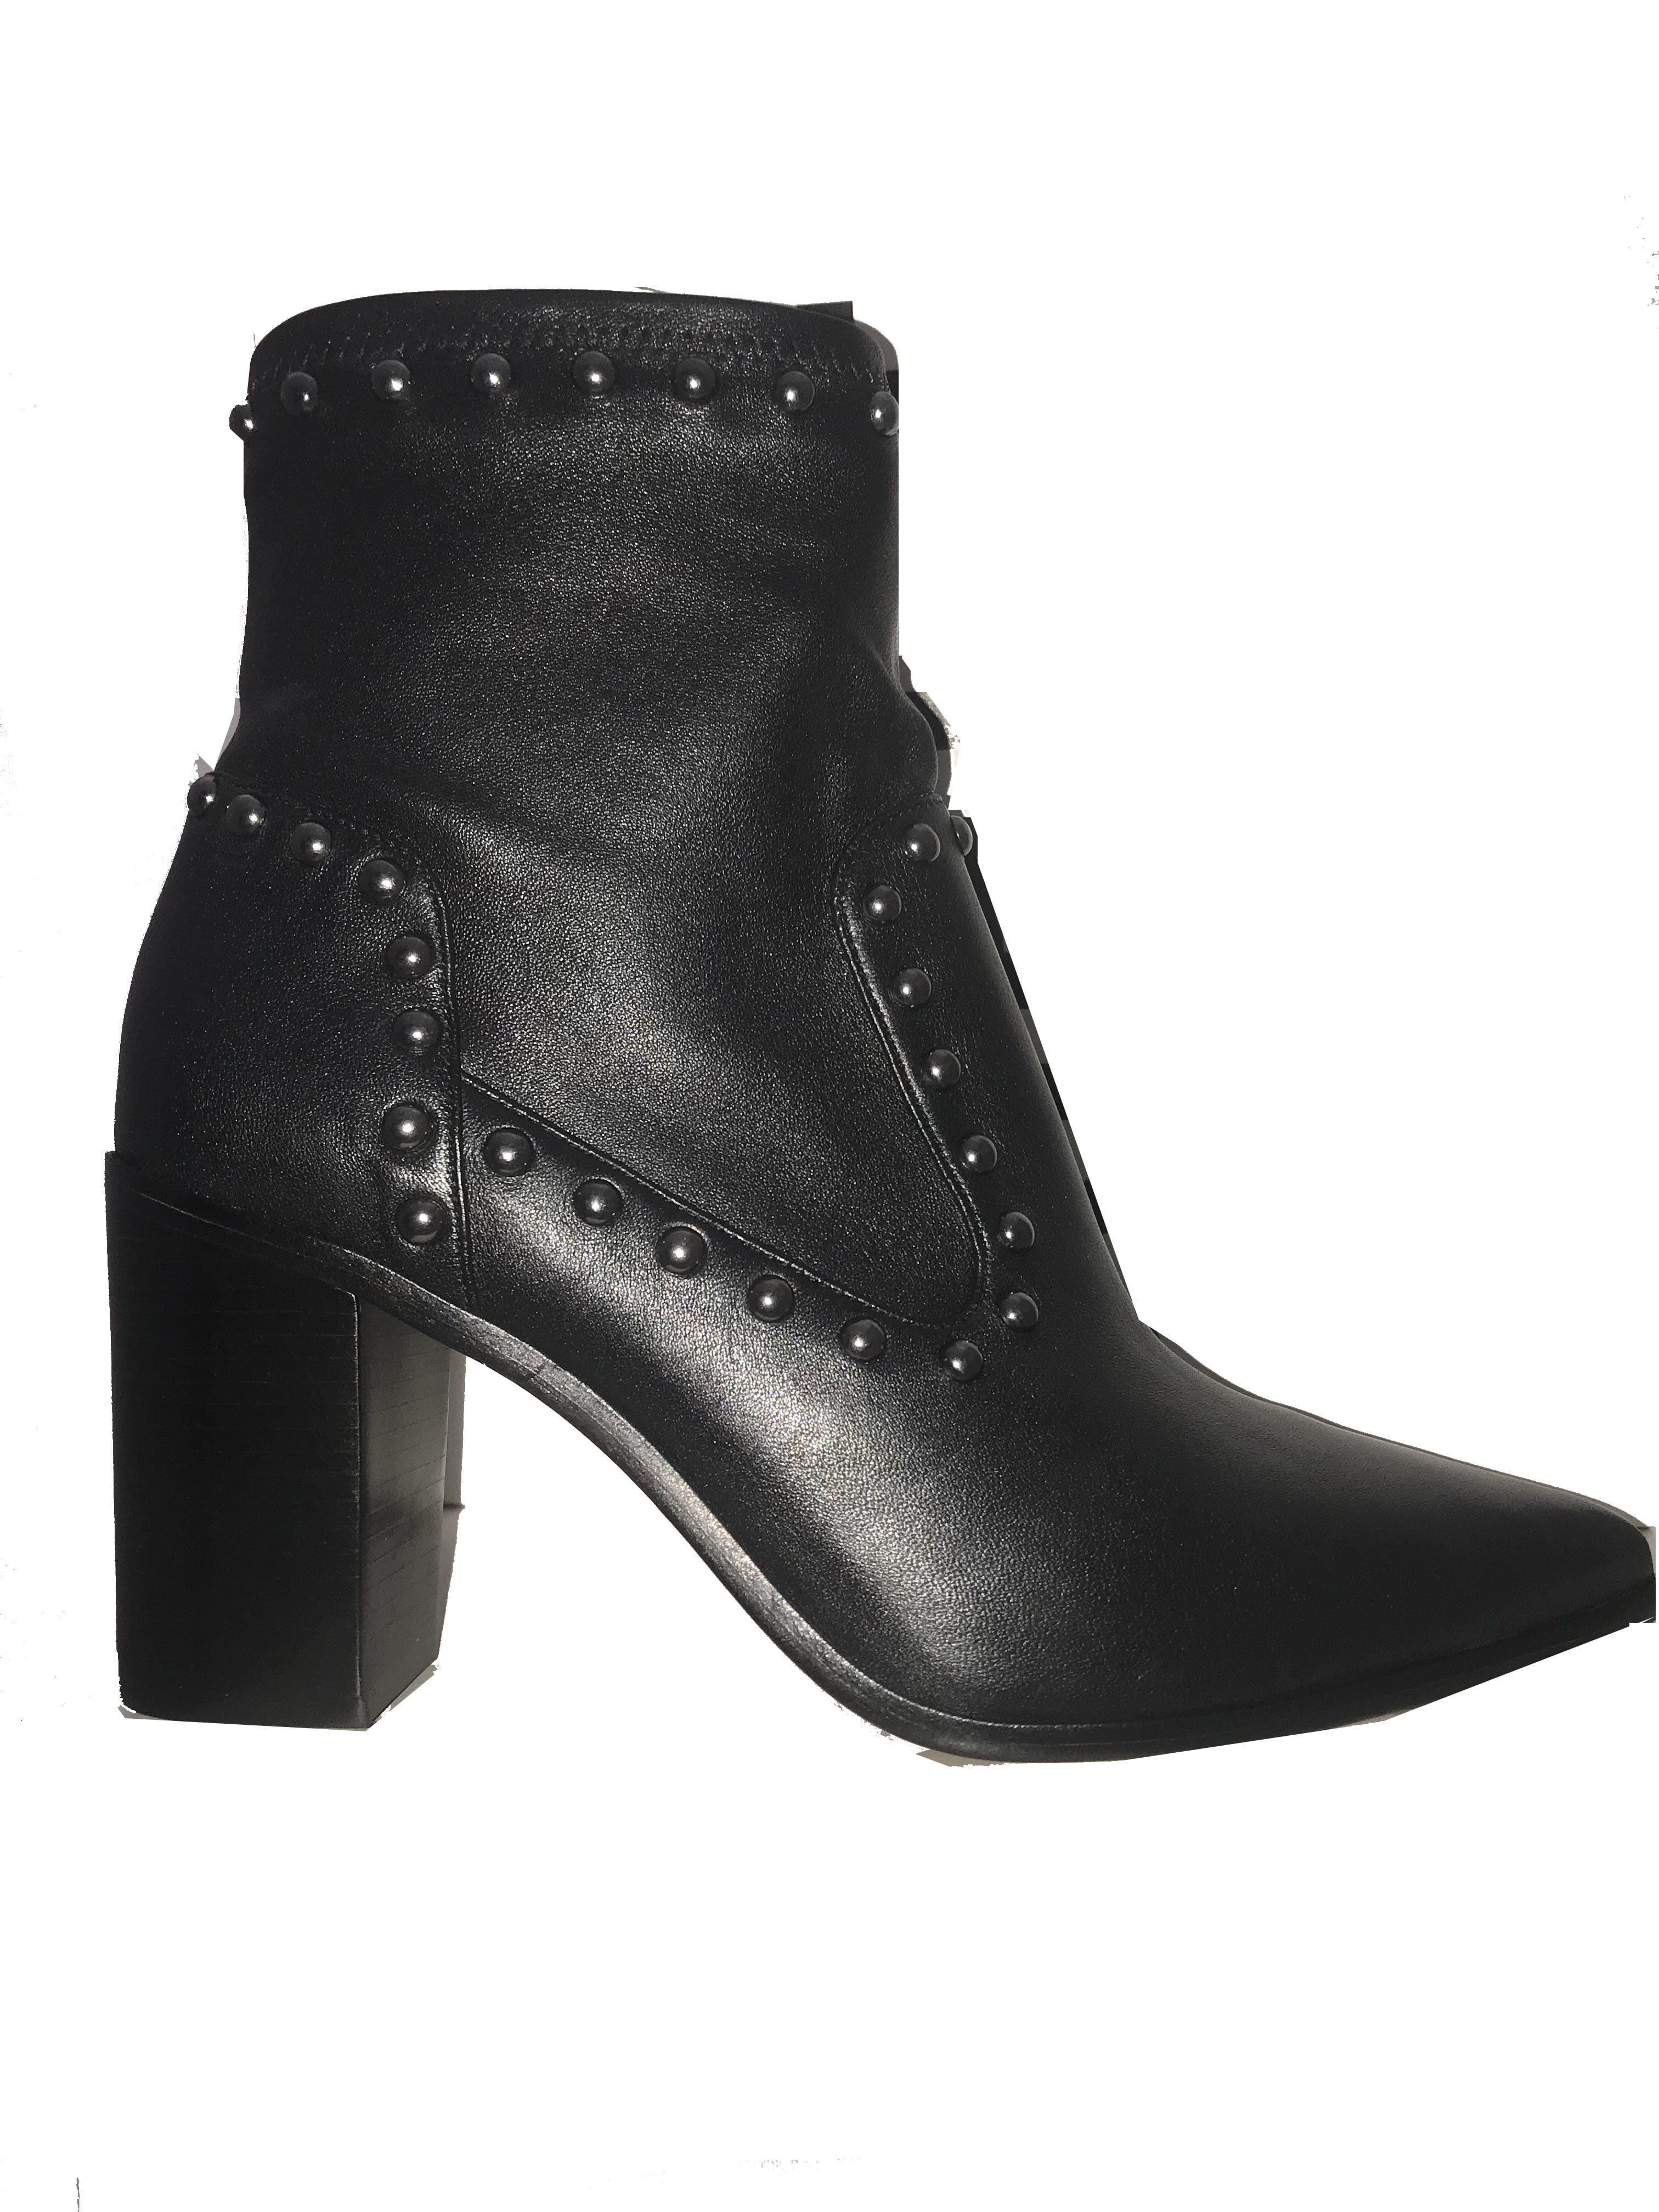 ONLY LOVE Black Nappa Round Toe Block Heeled Boot